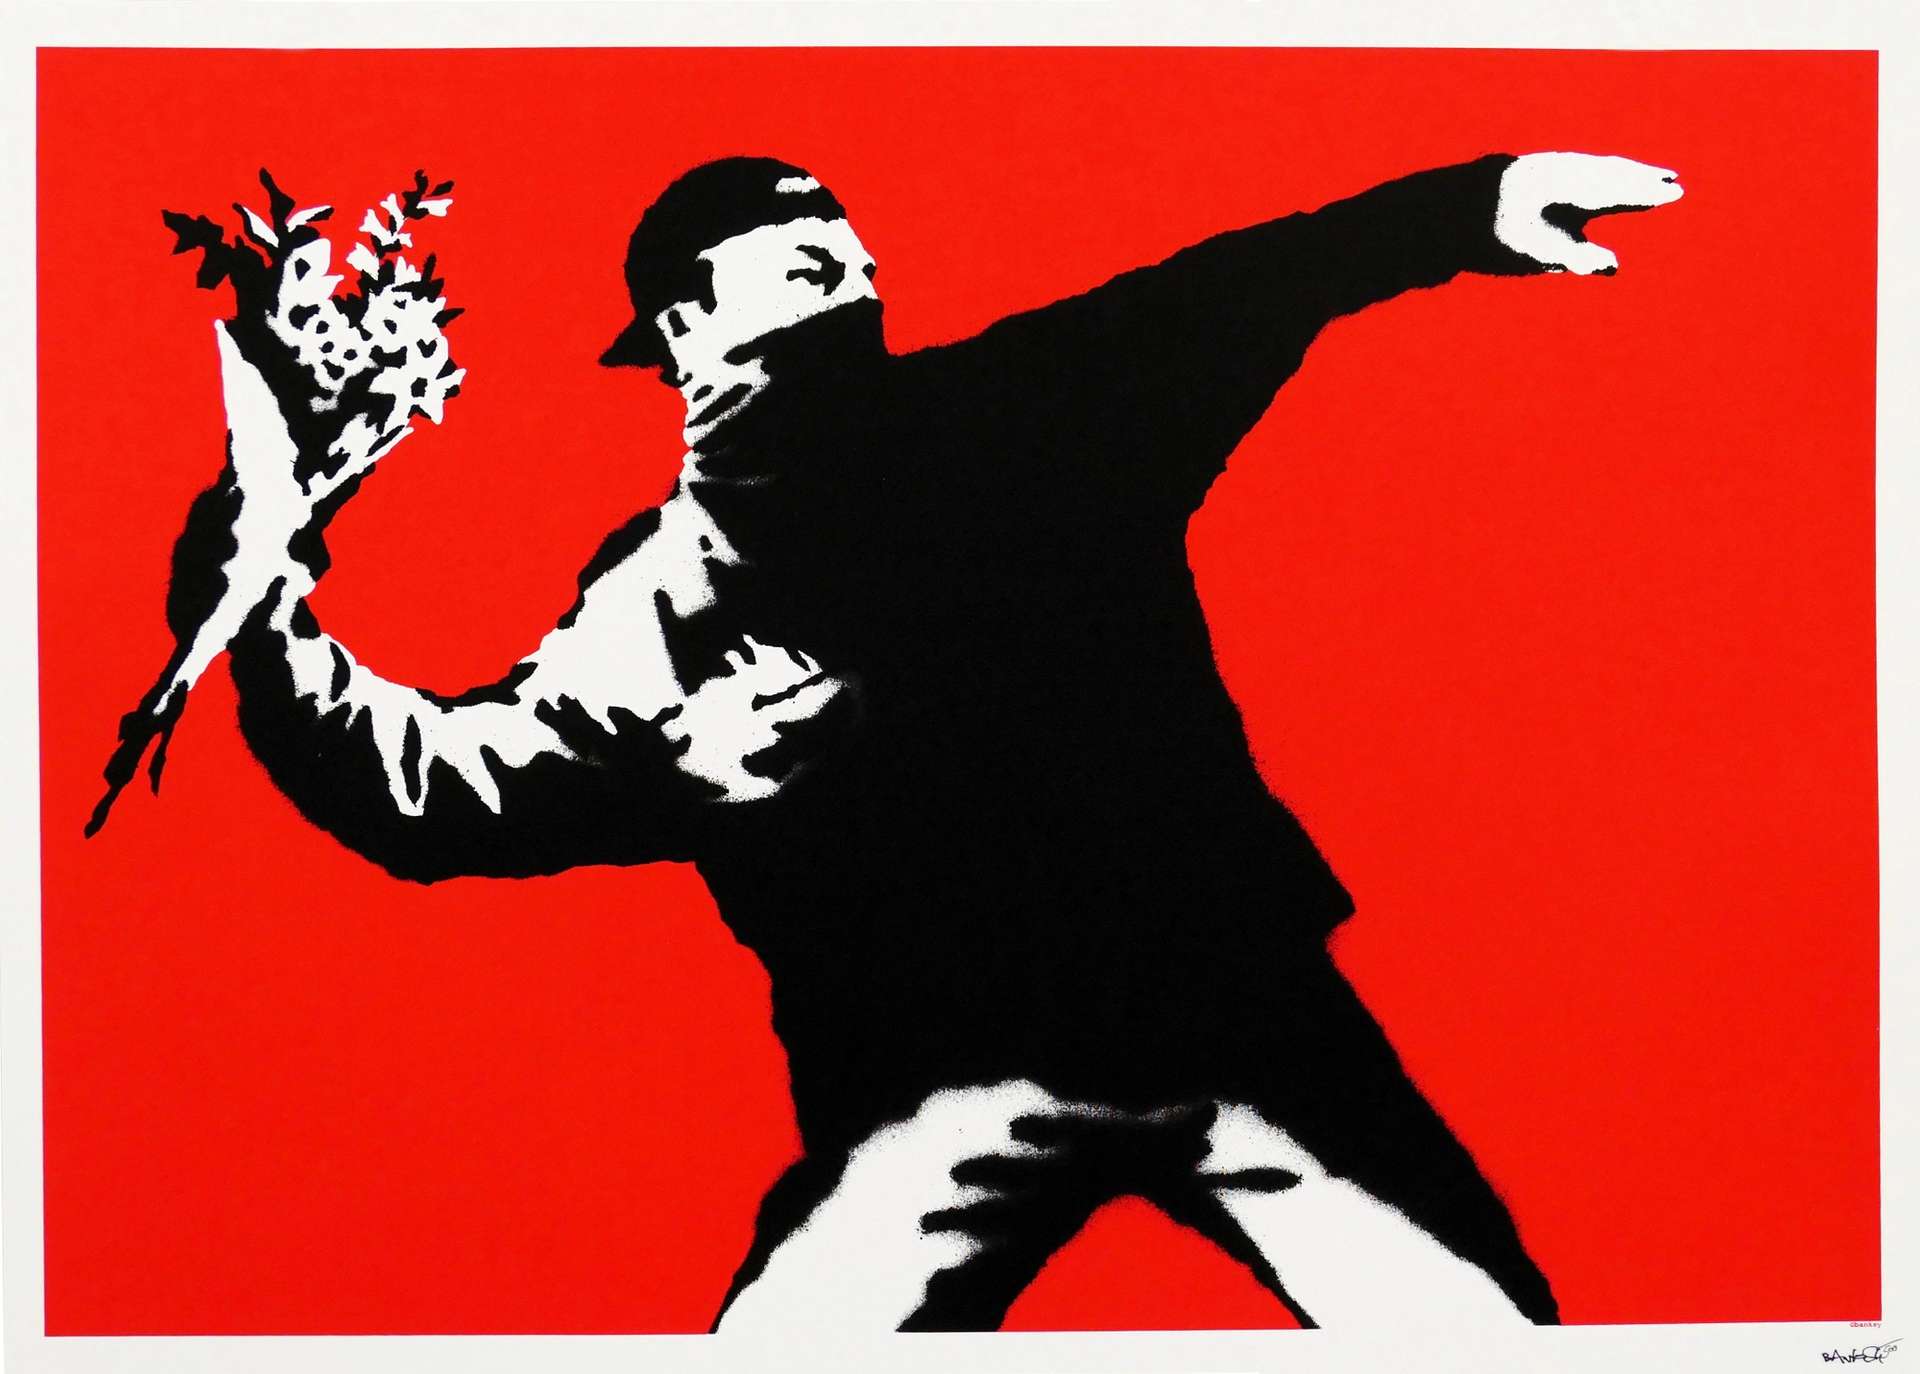 A screenprint by Banksy depicting a balaclava-wearing man holding a bouquet of flowers instead of a bomb, against a bright red background.